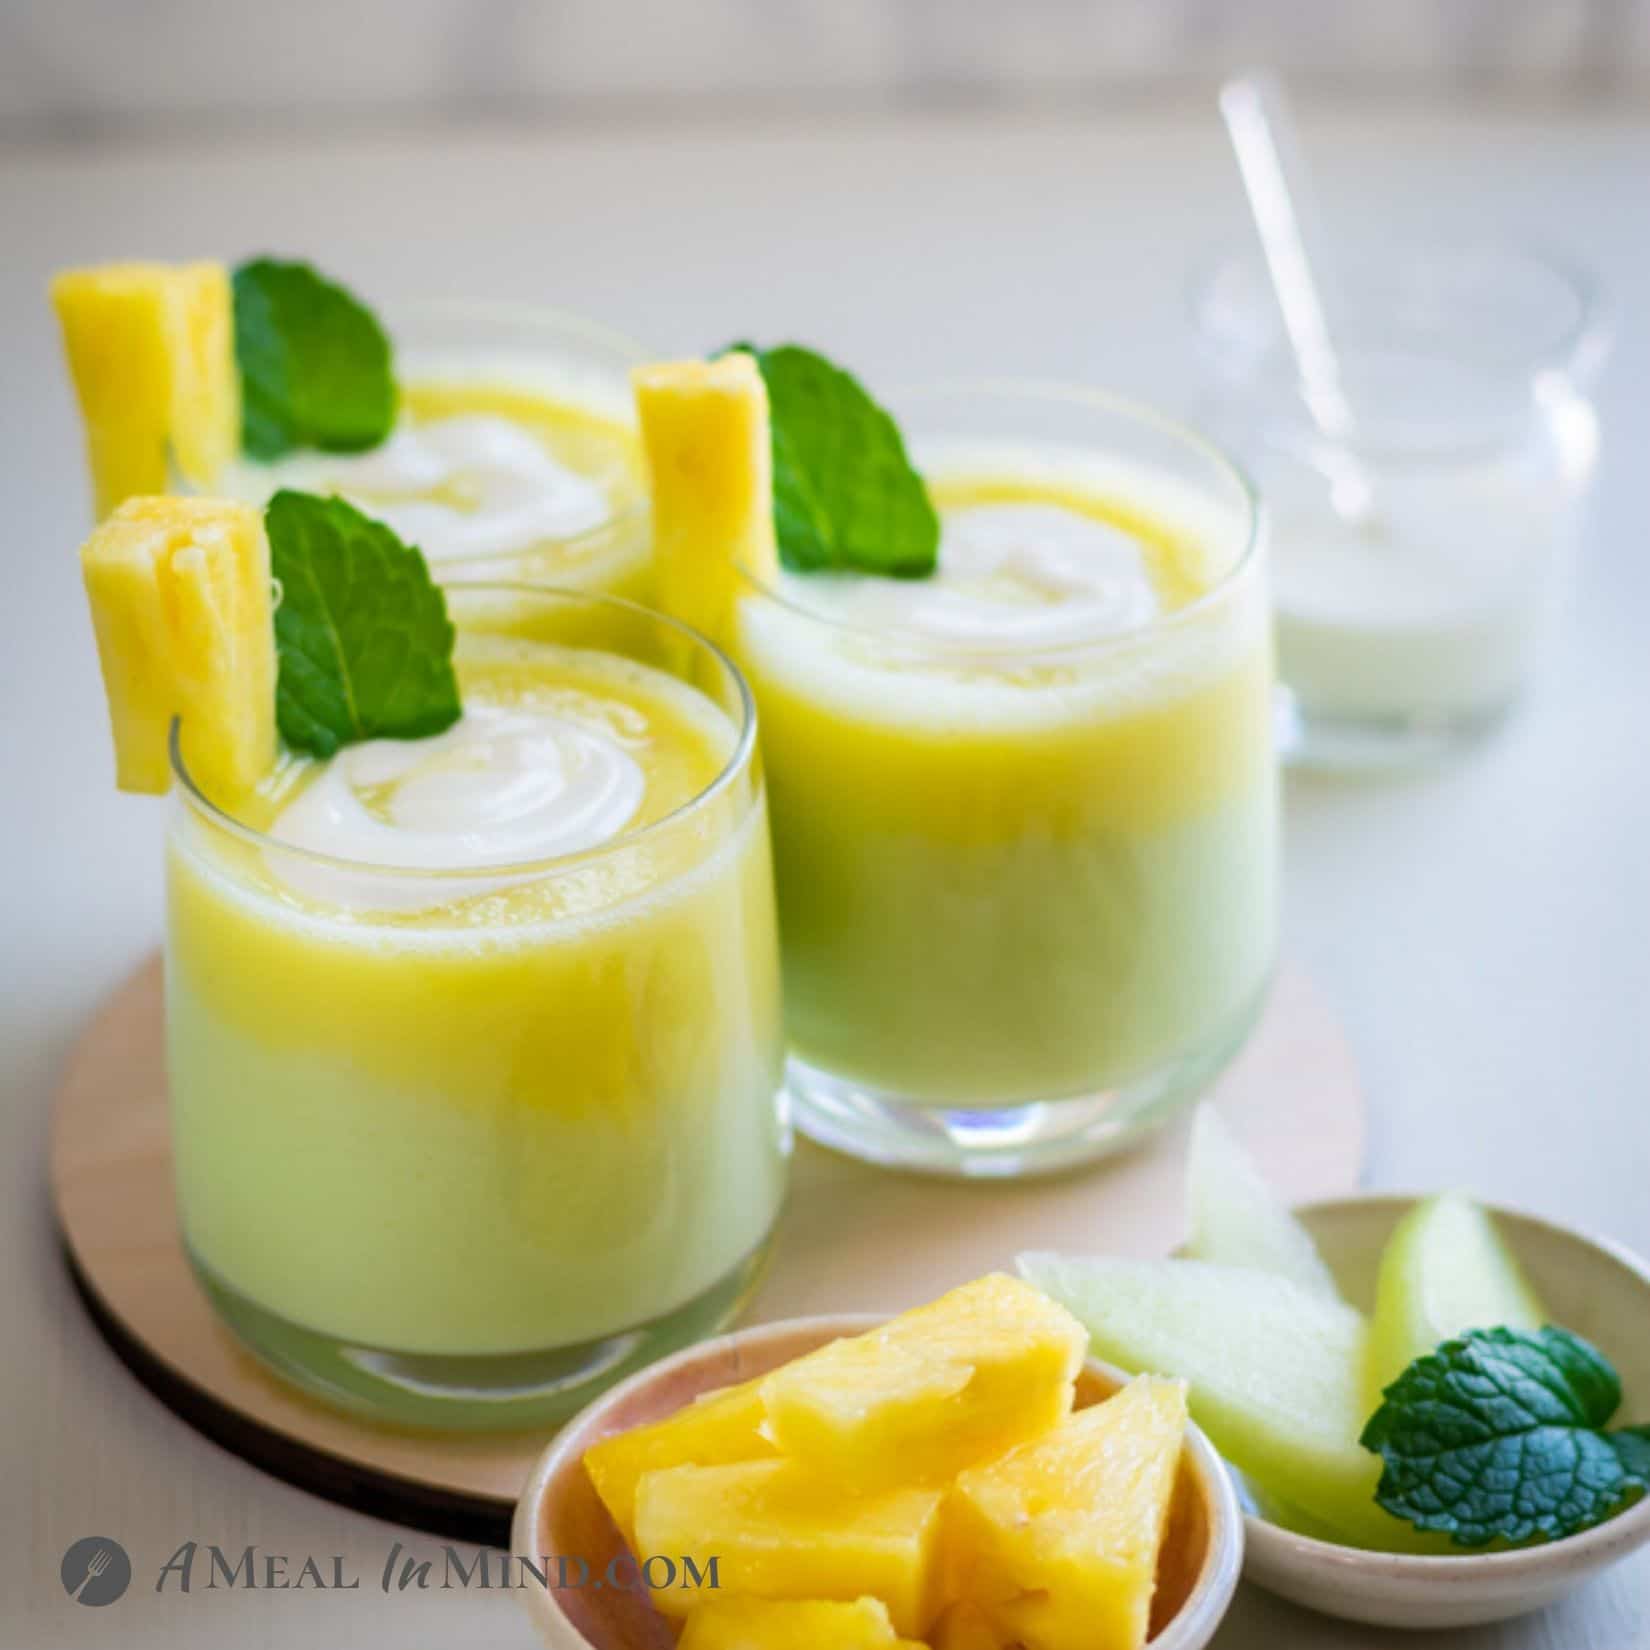 Layered Pineapple-Honeydew Lassi in three clear glasses with pineapple garnish